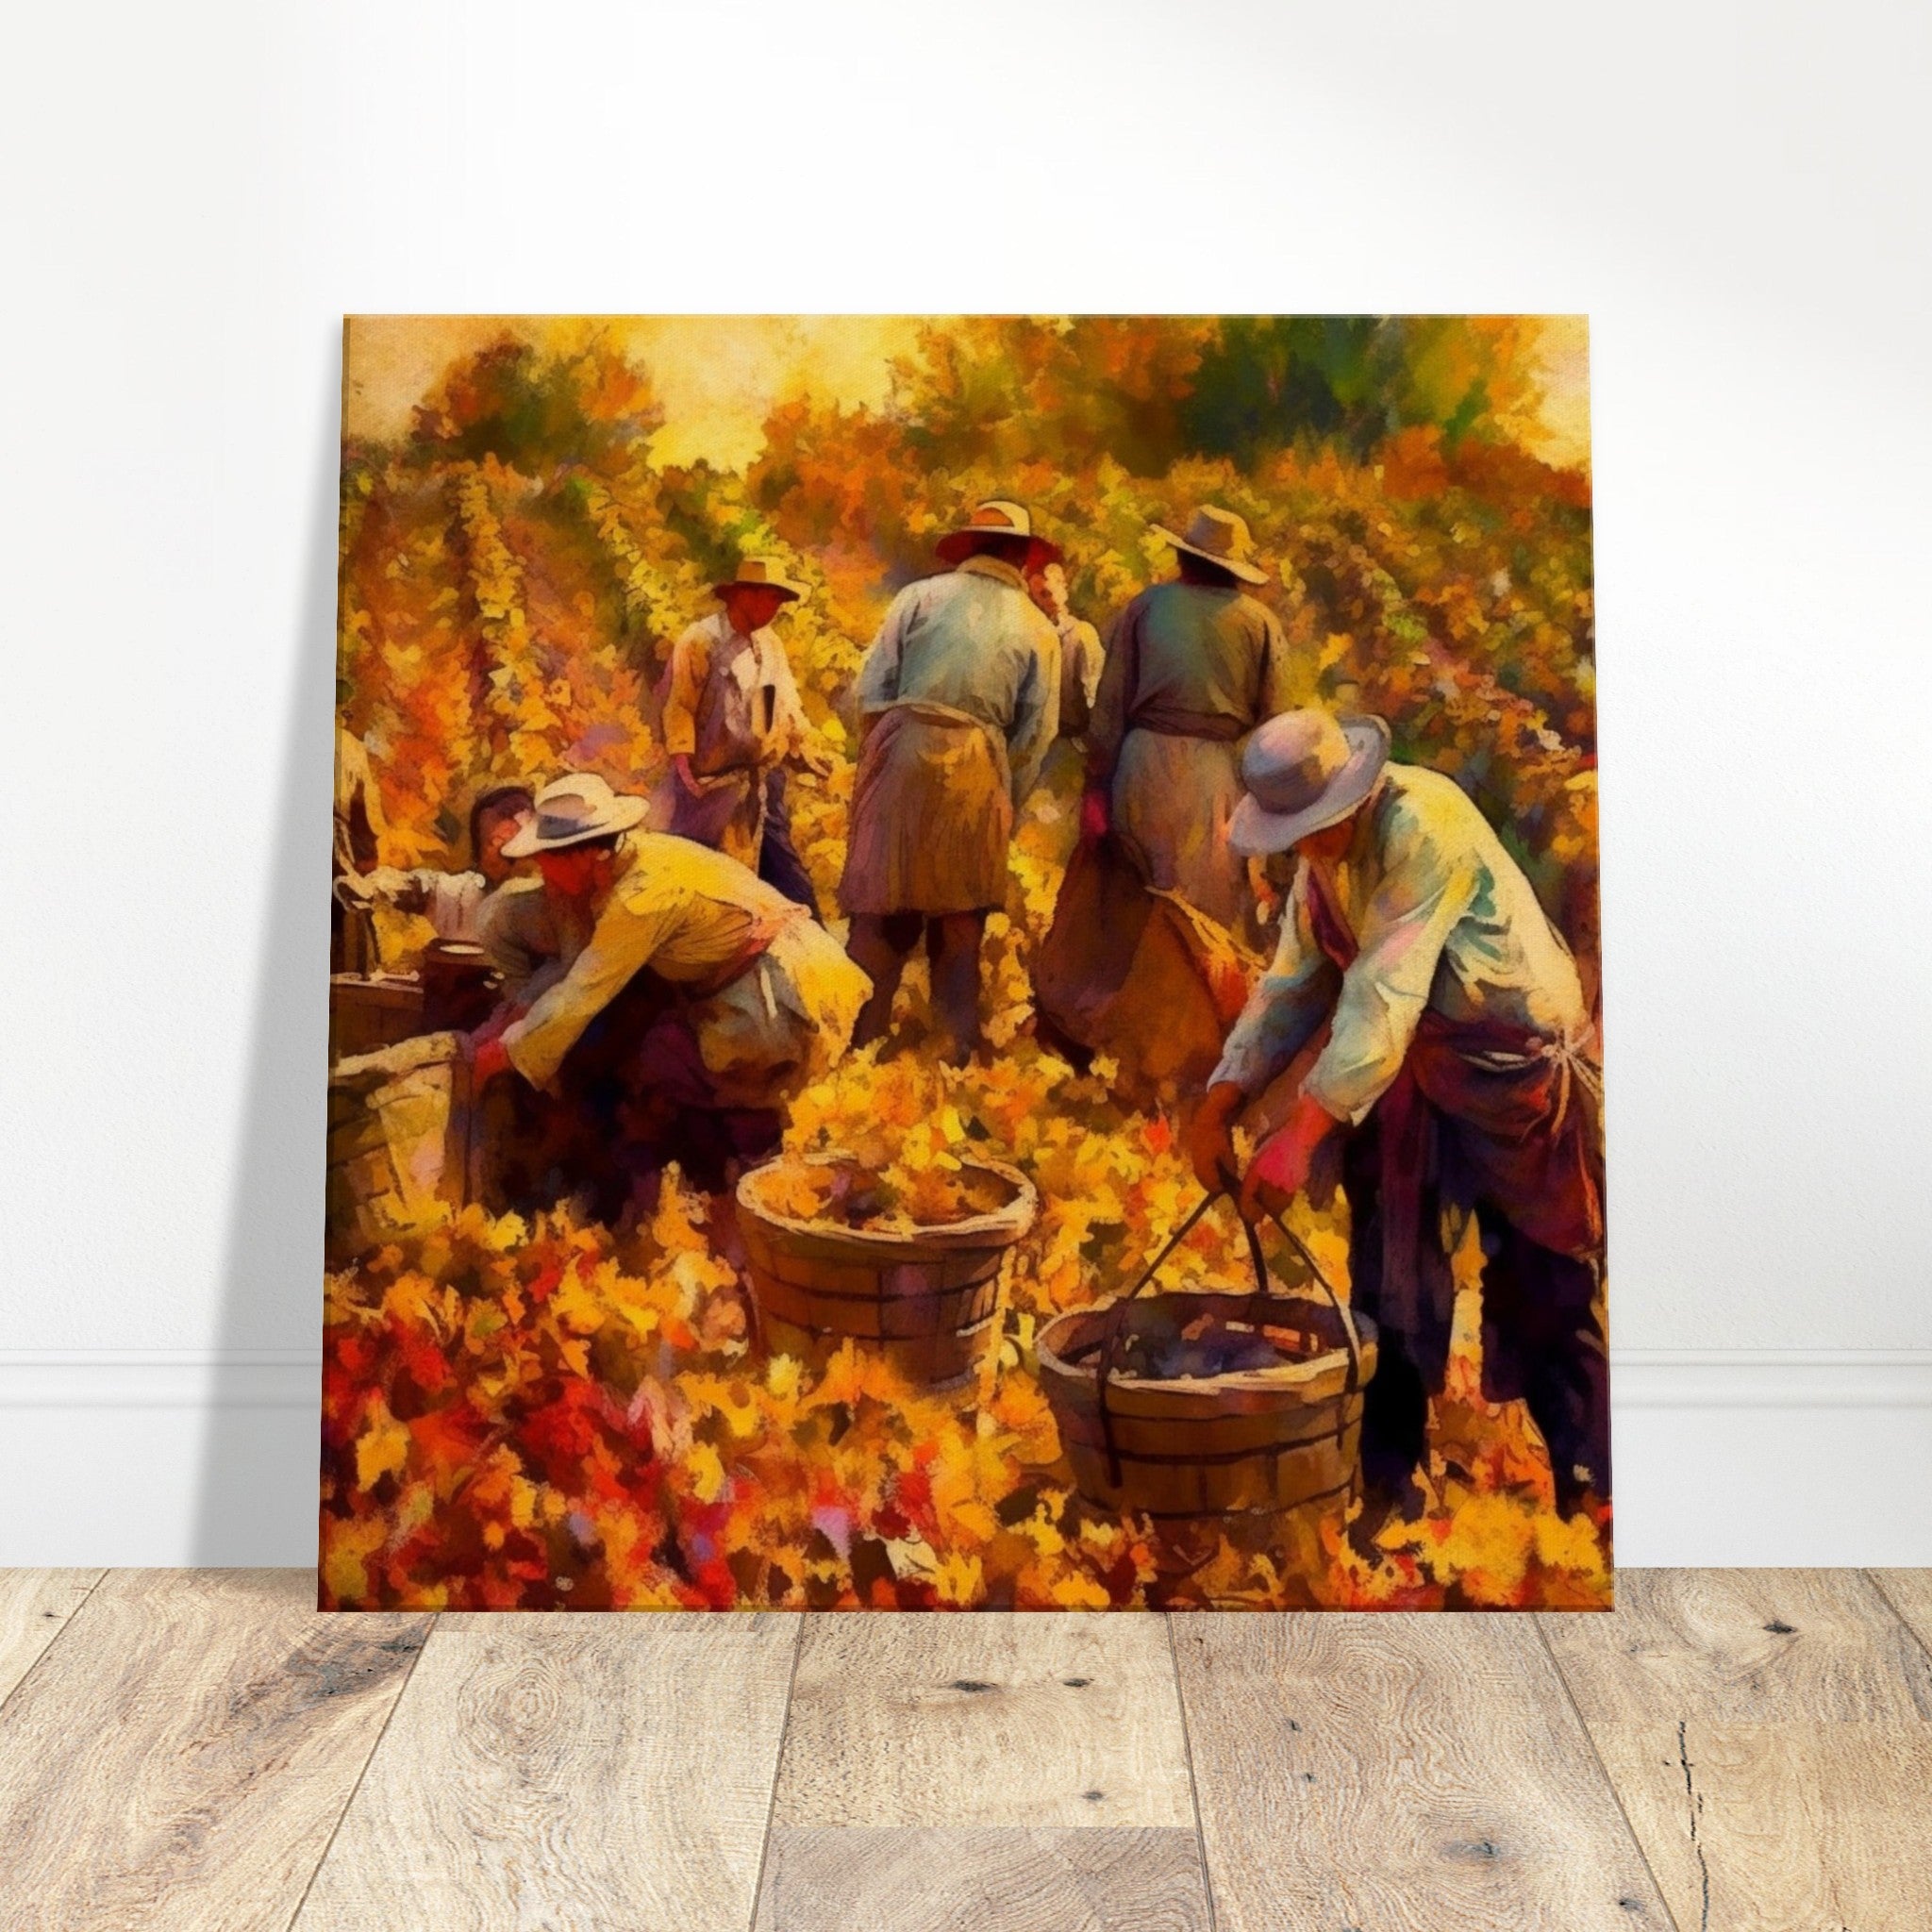 Impressionist Harvest Canvas - A Vineyard's Story in Brushstrokes